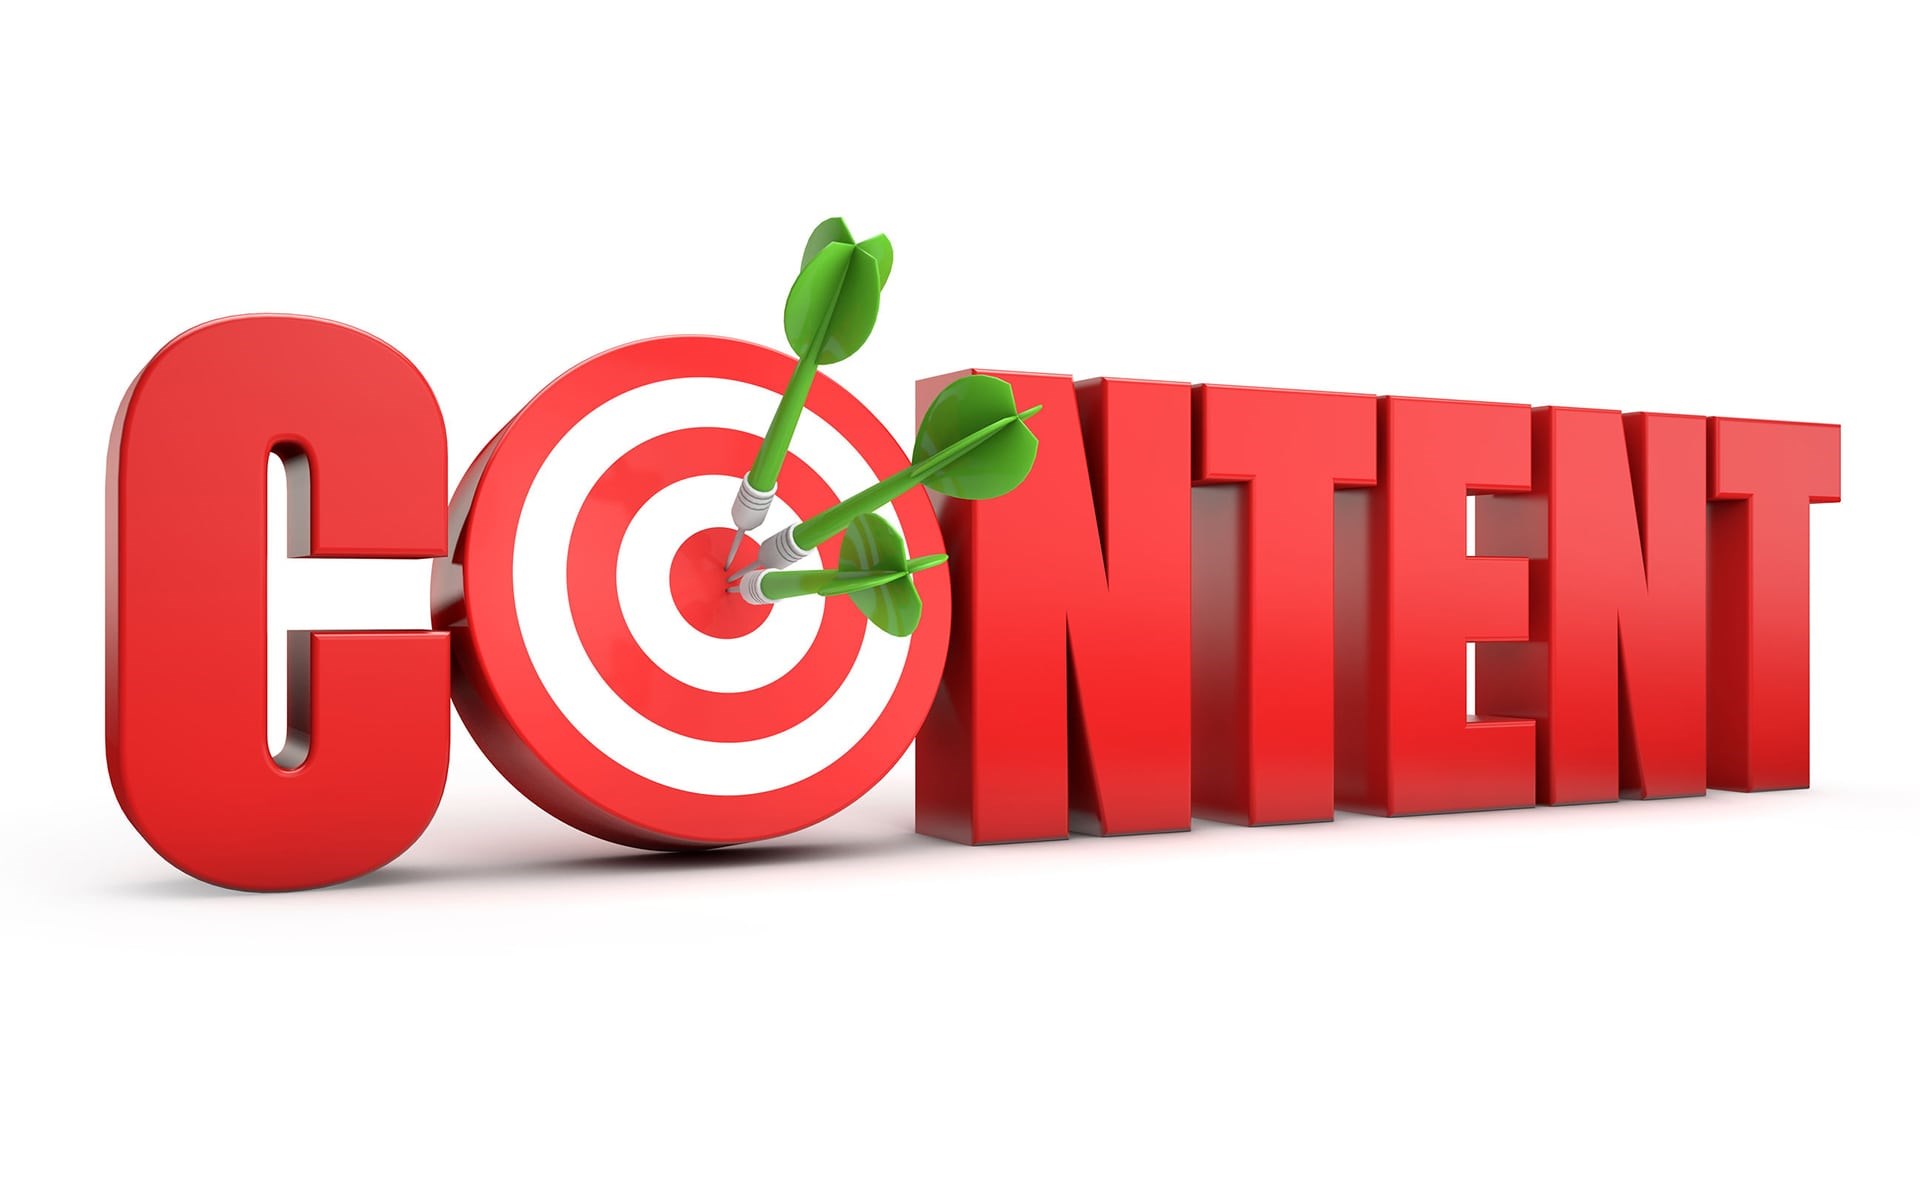 Why is fresh content important for websites?